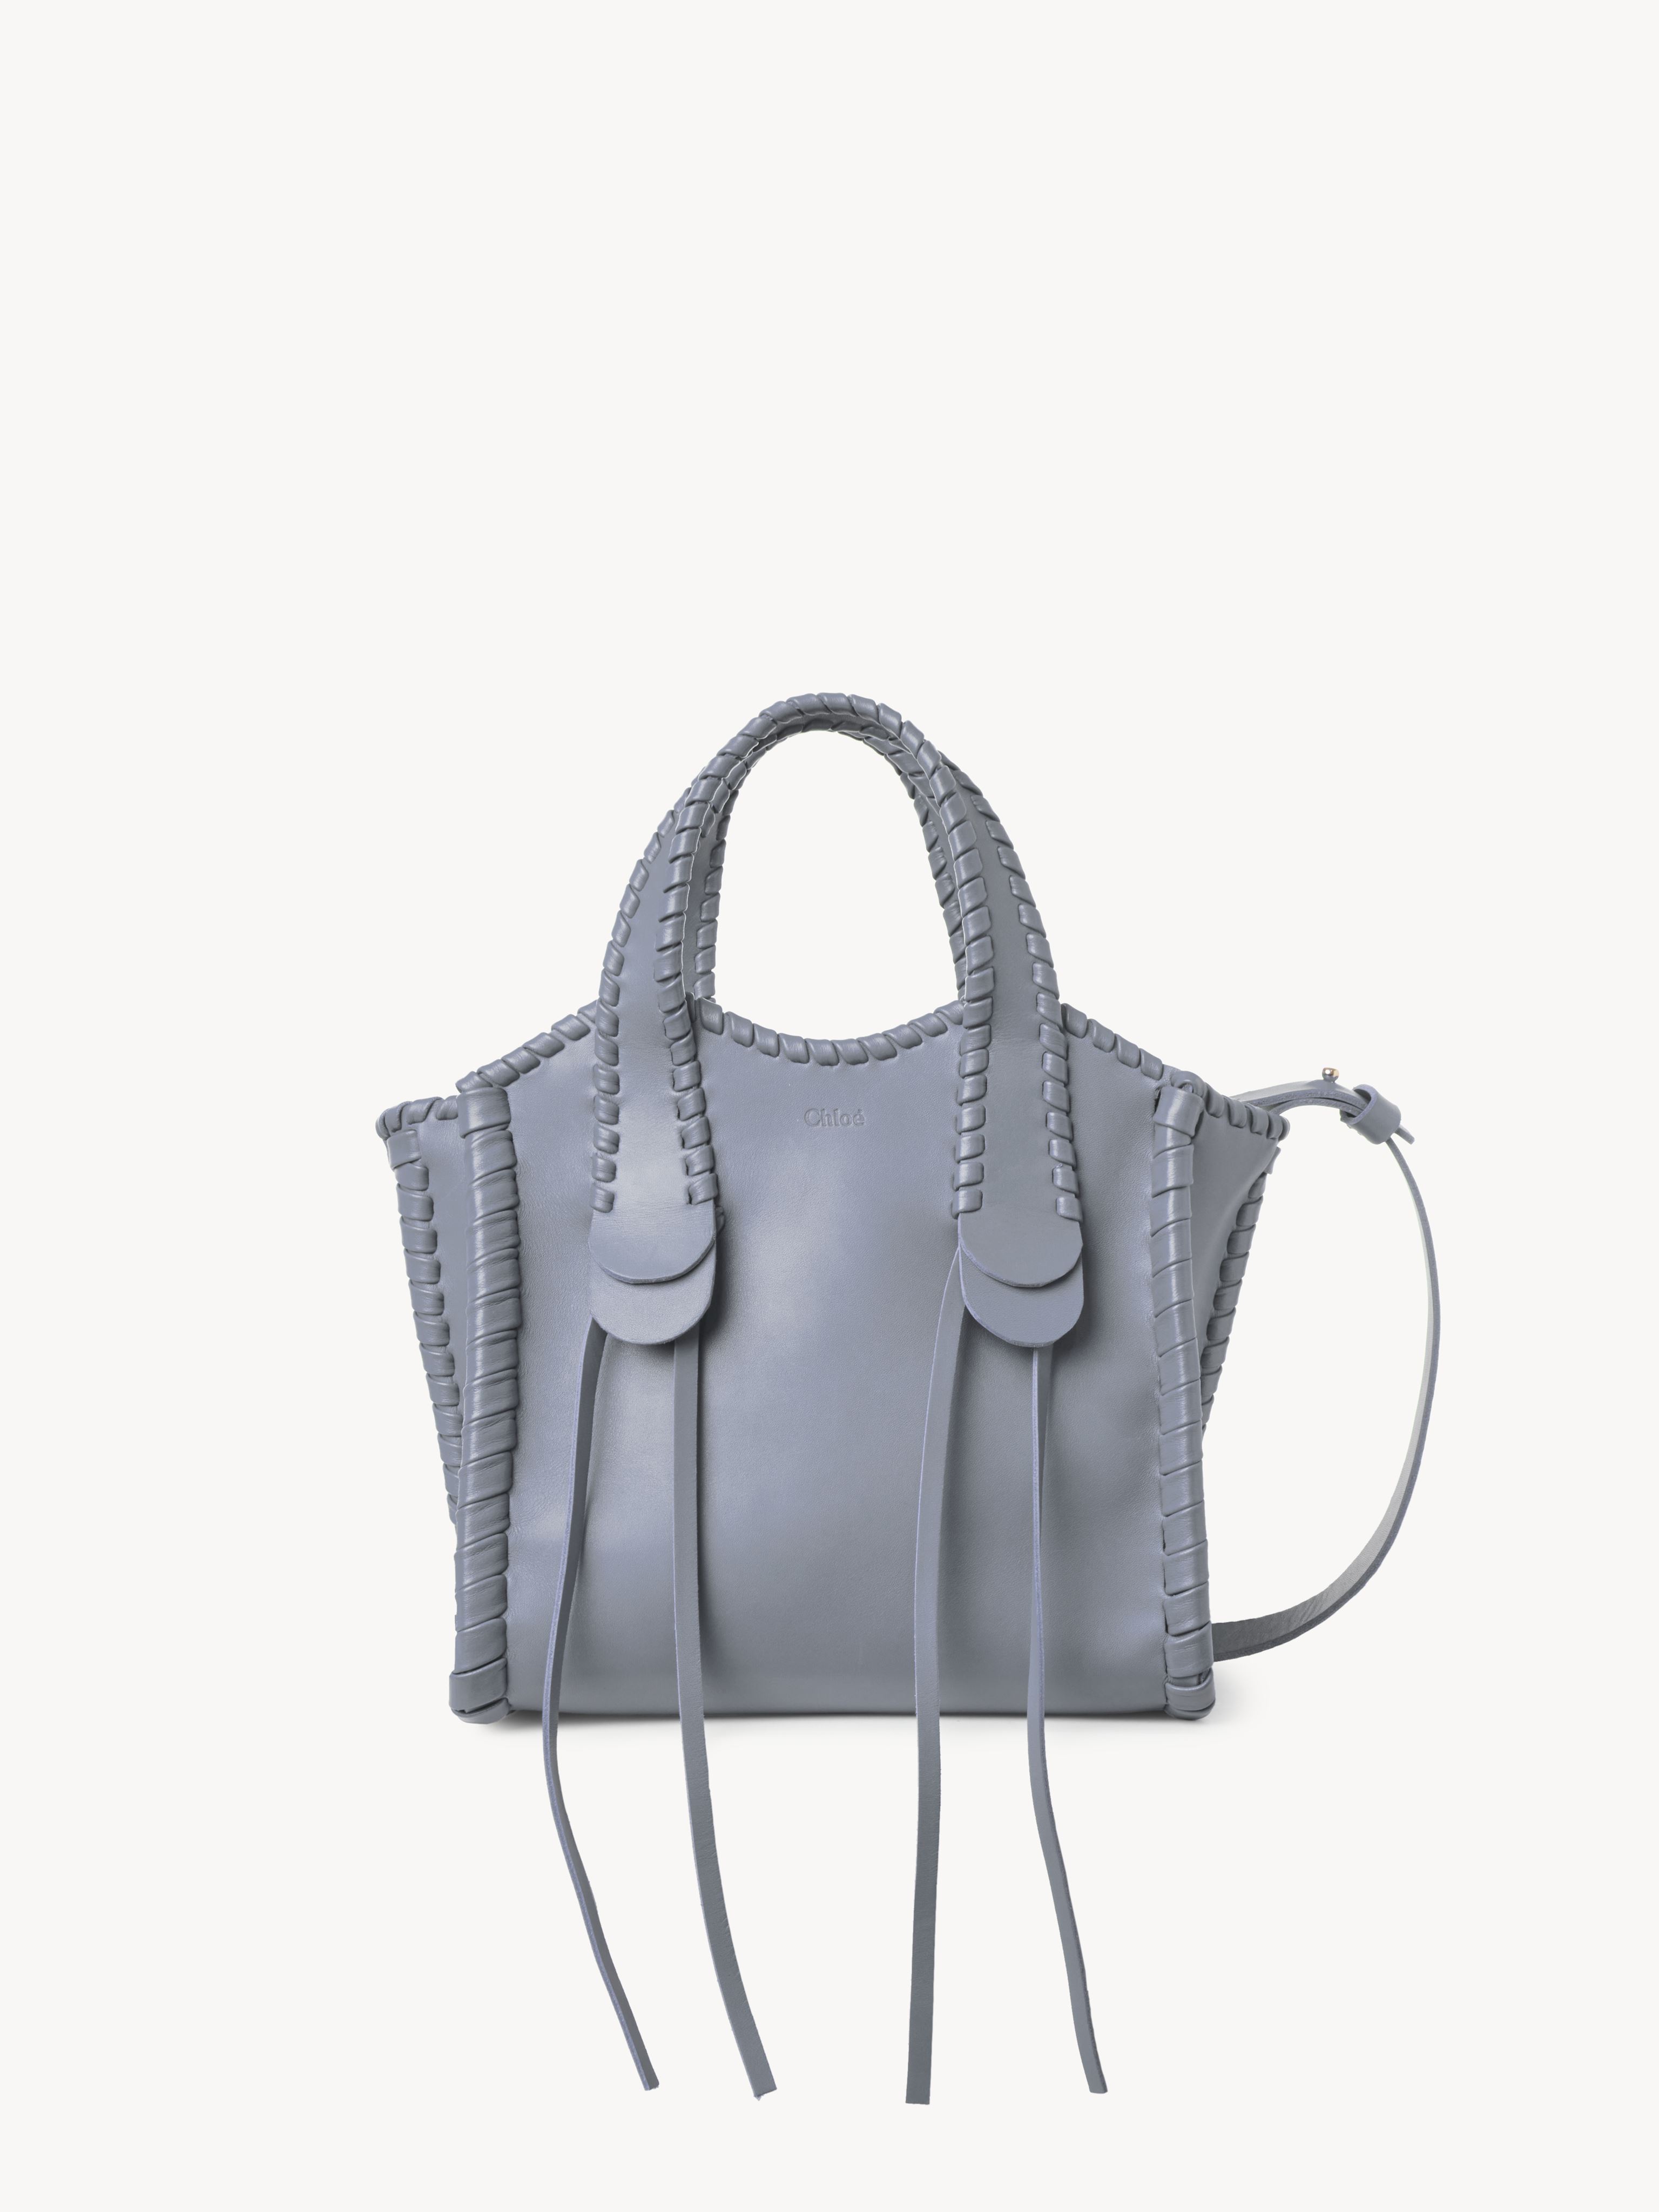 Chloé Small Mony Tote Bag Blue Size Onesize 100% Calf-skin Leather